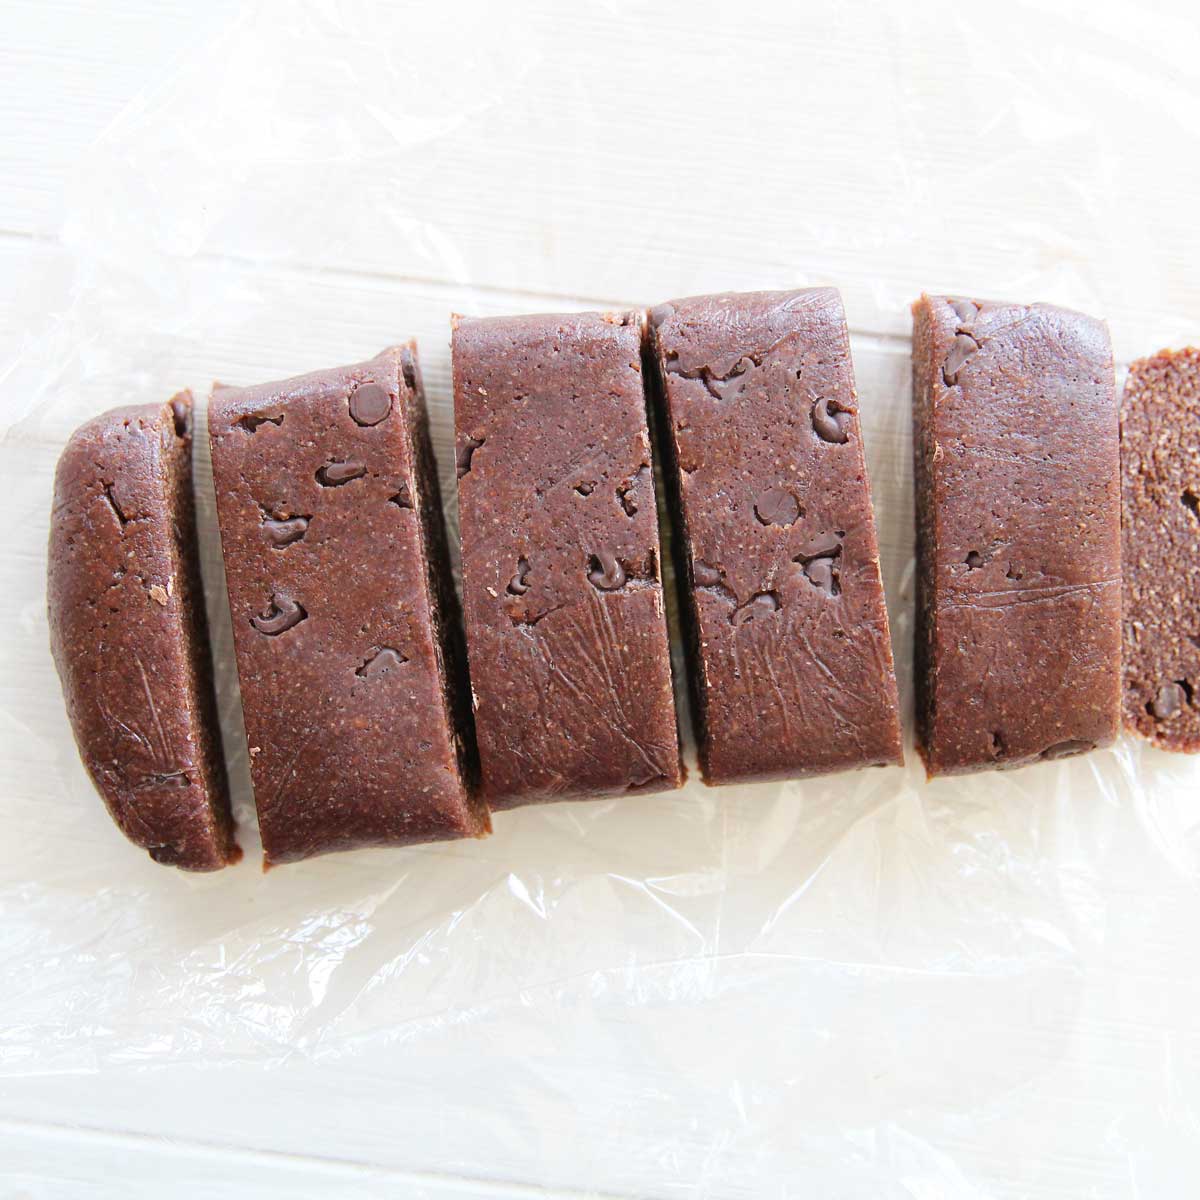 Easy Nutella Protein Bars (with Collagen Peptides Protein Powder) - Nutella Protein Bars